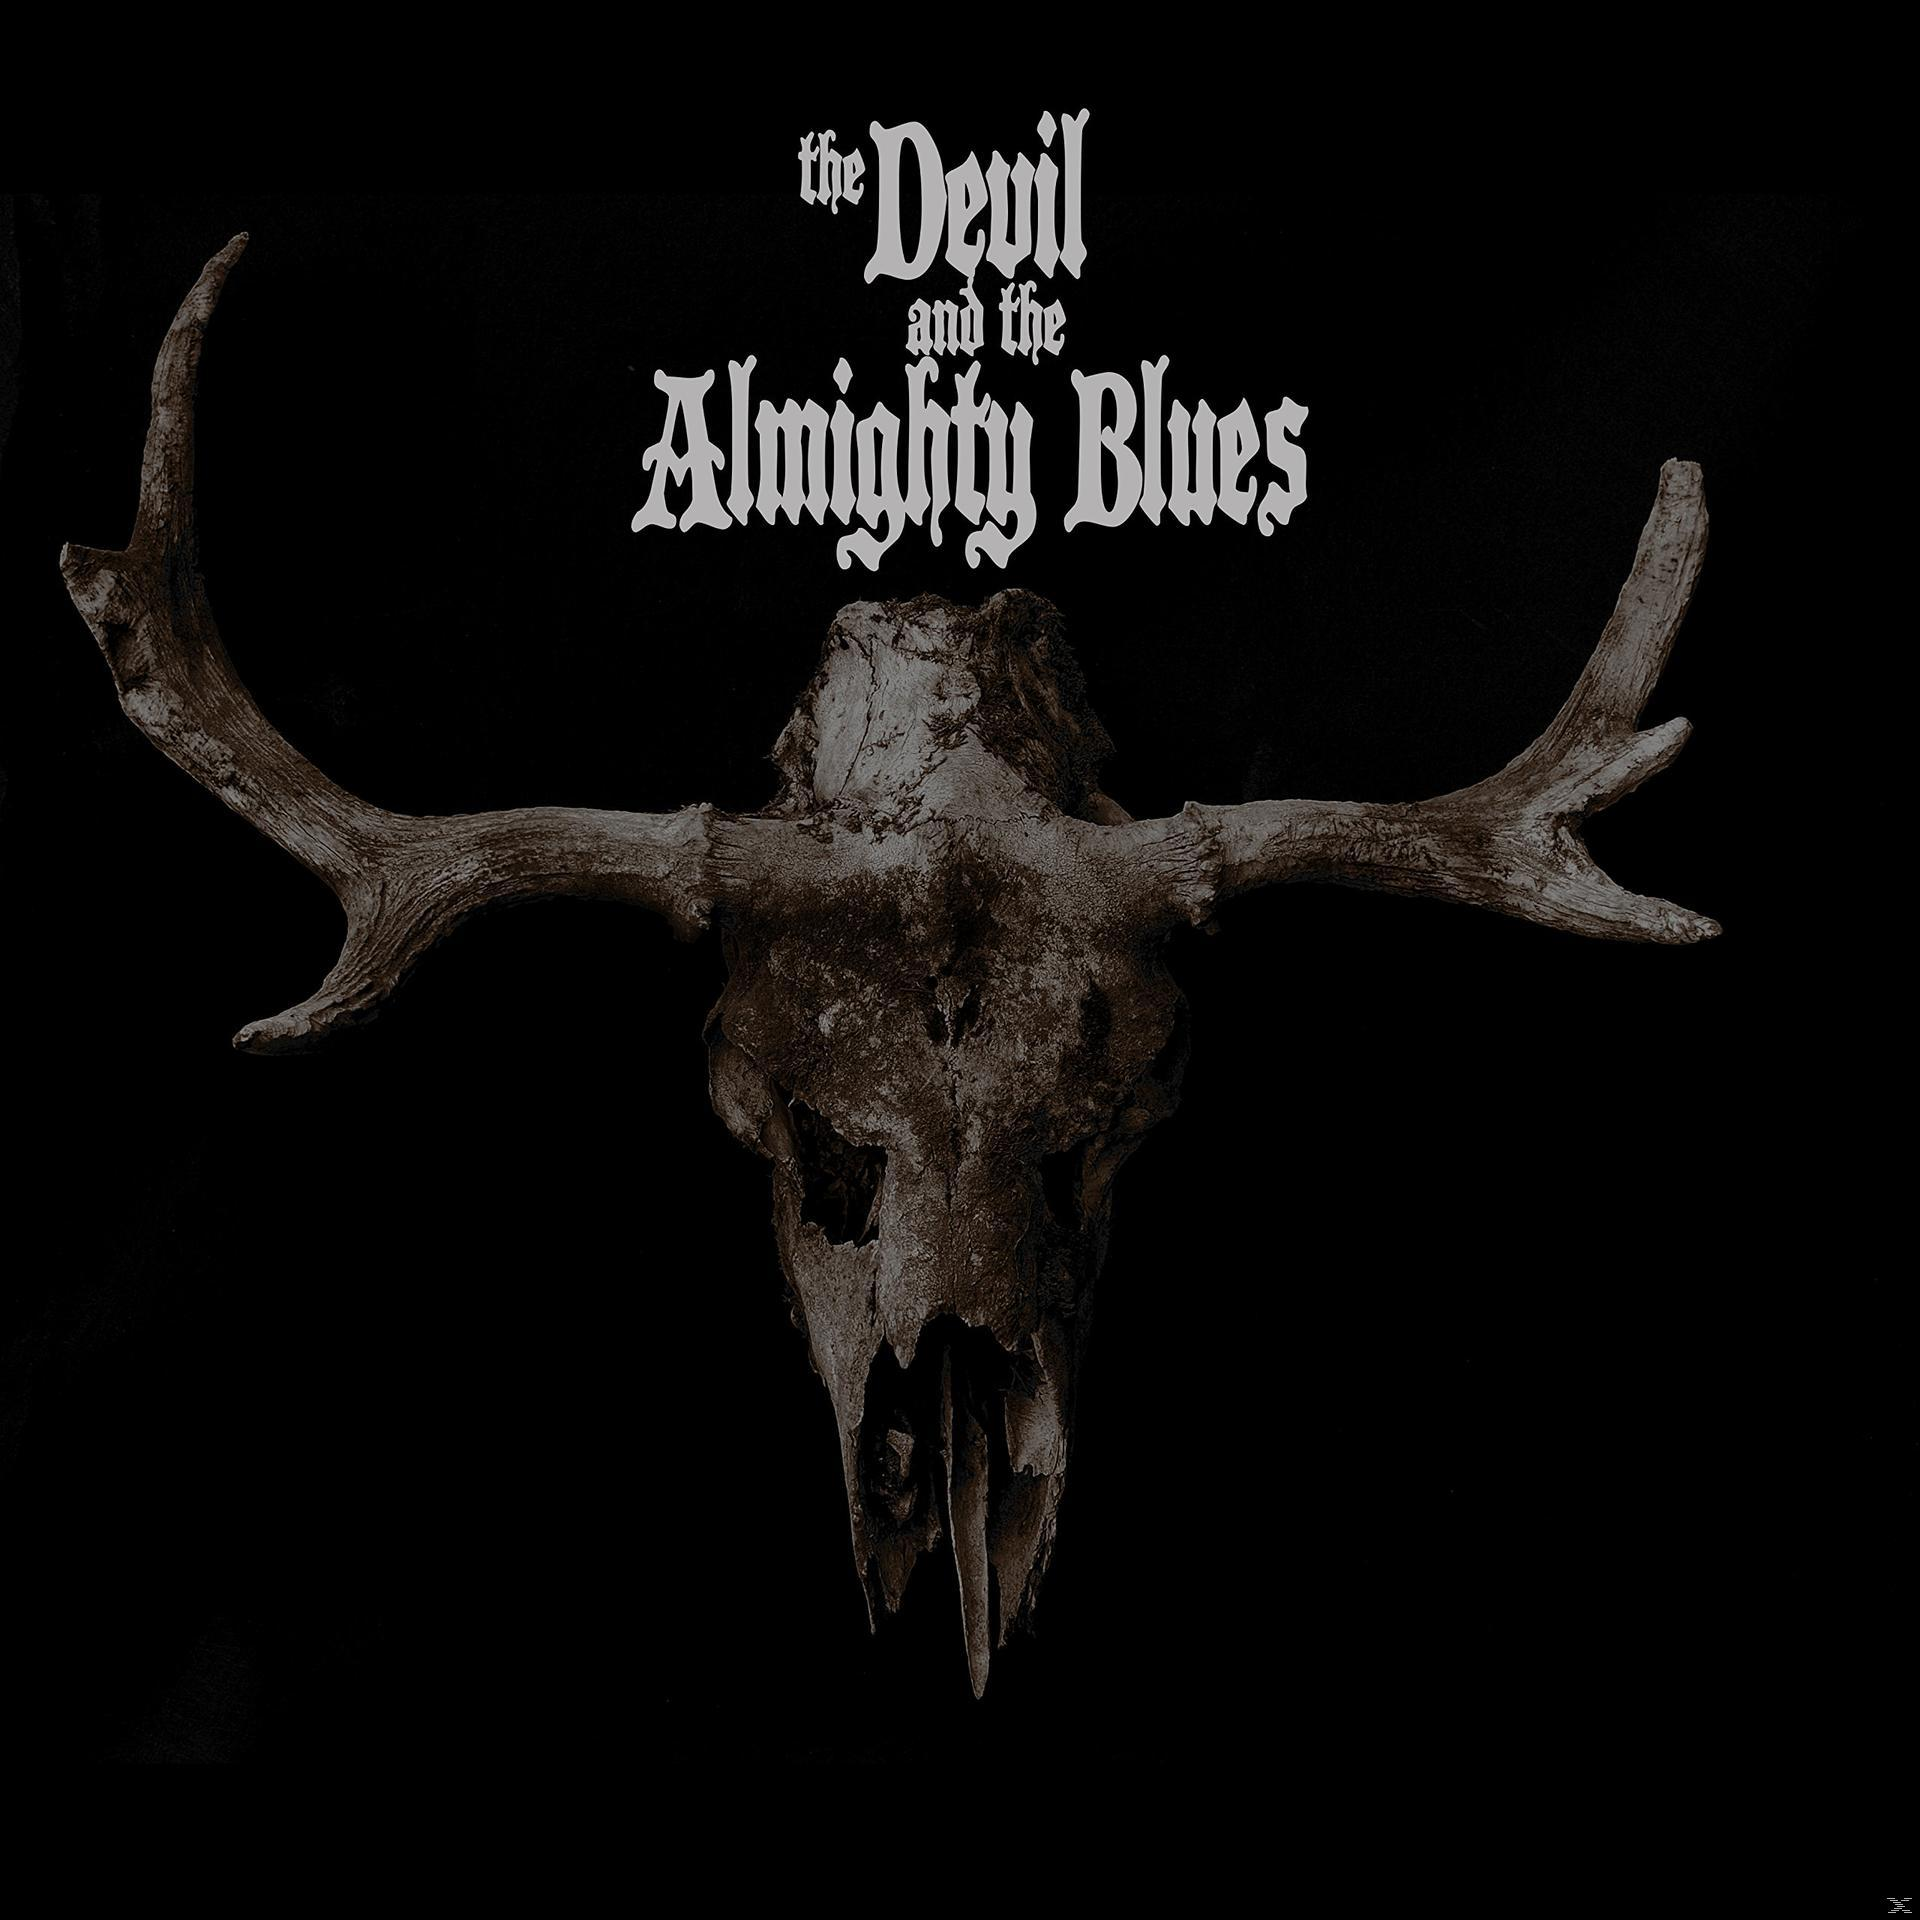 Almighty The Almighty (Vinyl) And Devil Devil - - Blues Blues The And The